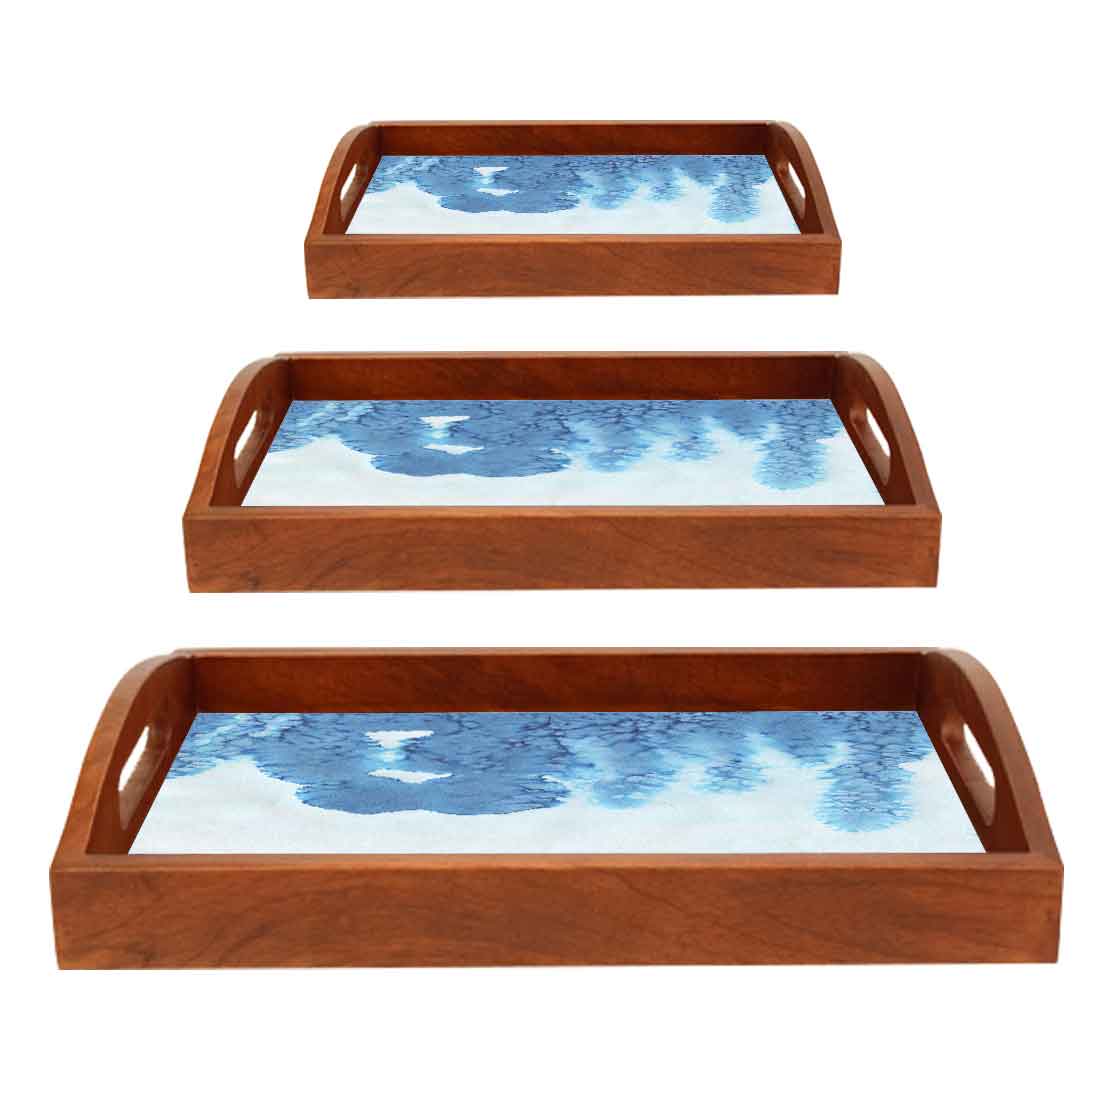 Wooden Serving Tray with Handle  Set of 3 for Kitchen Use